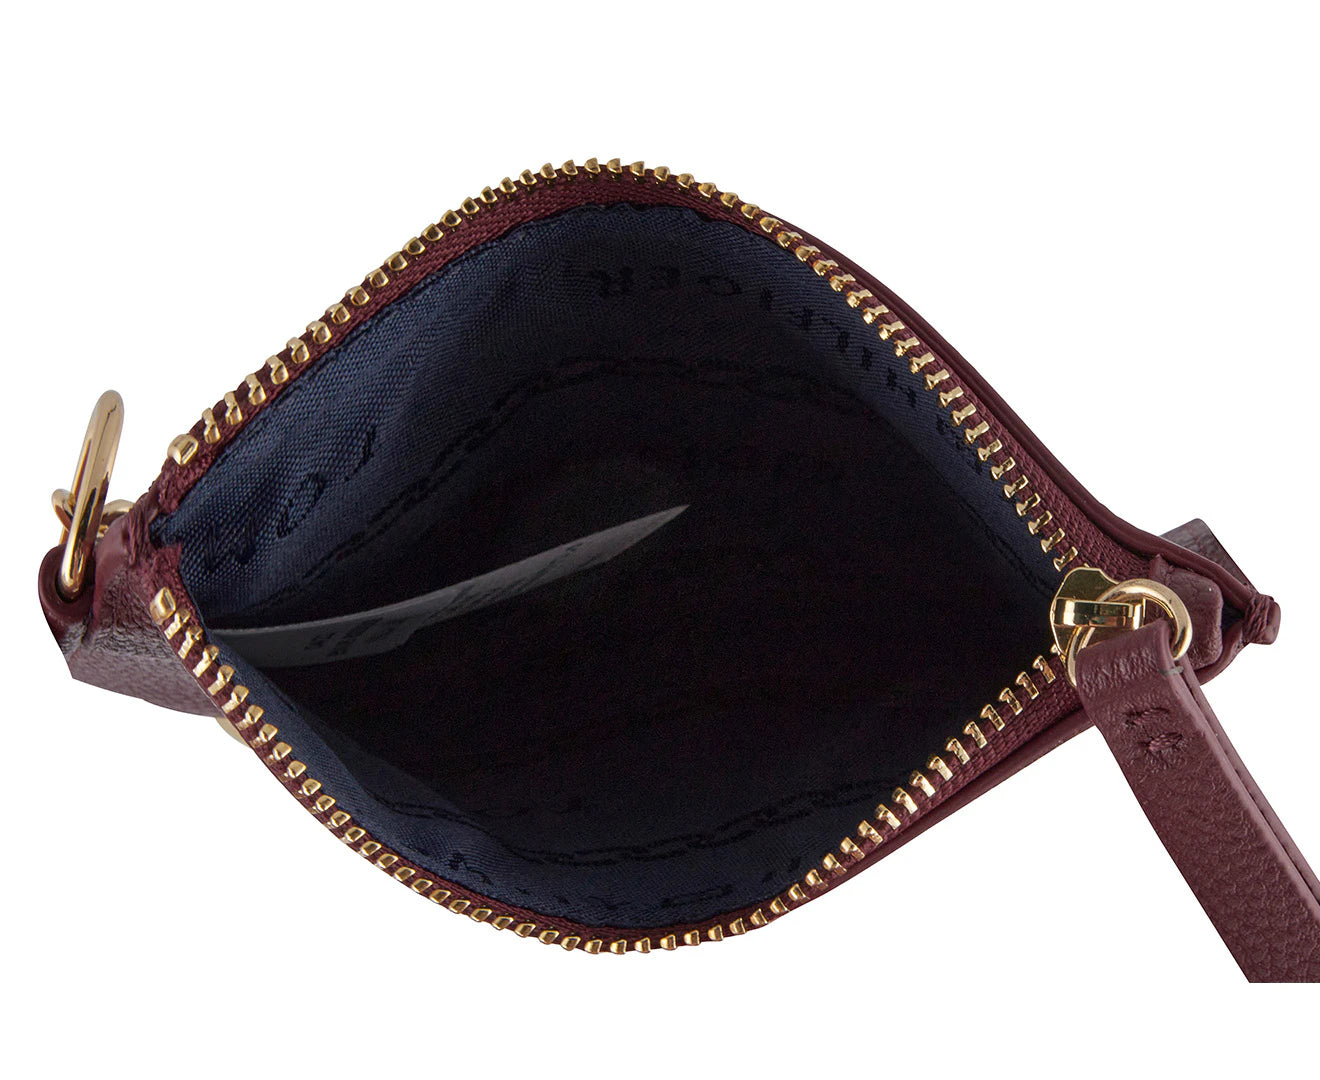 Tommy Hilfiger Coin Purse Wallet - Deep Rouge Burgundy Red Maroon & Gold (Inside)